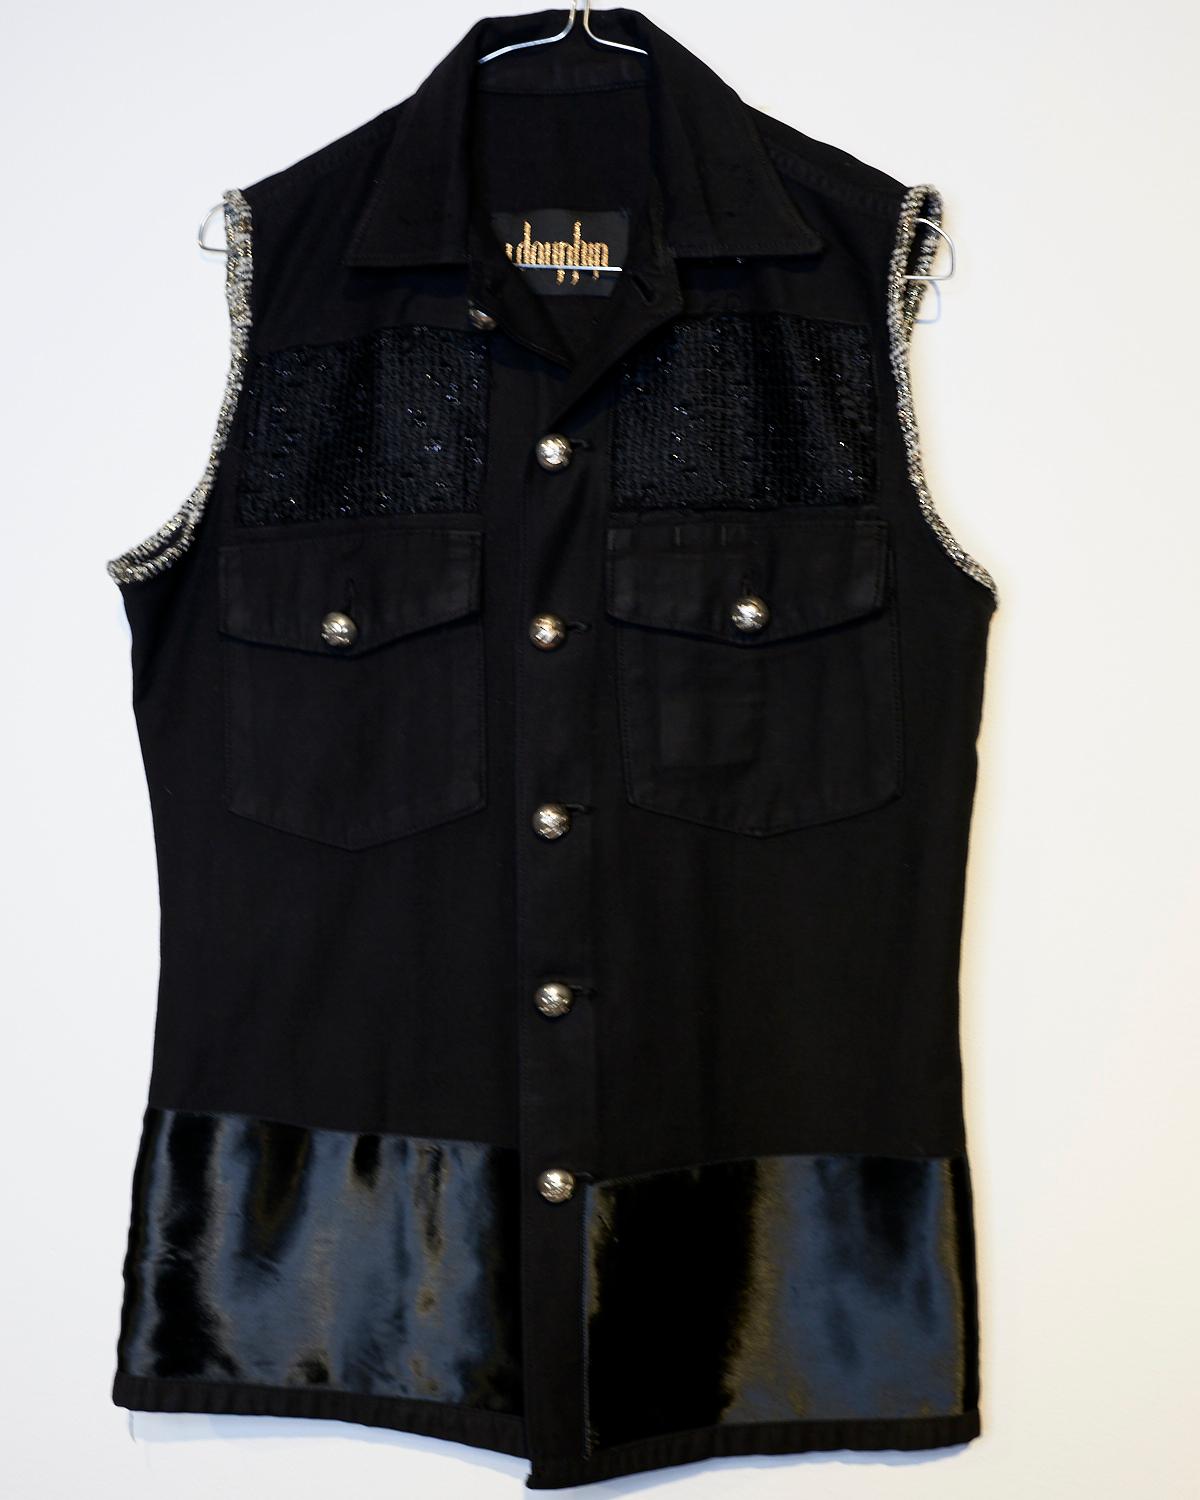 Embellished Sleeveless Jacket vest Military Gold Tweed Silver Button J Dauphin In New Condition For Sale In Los Angeles, CA